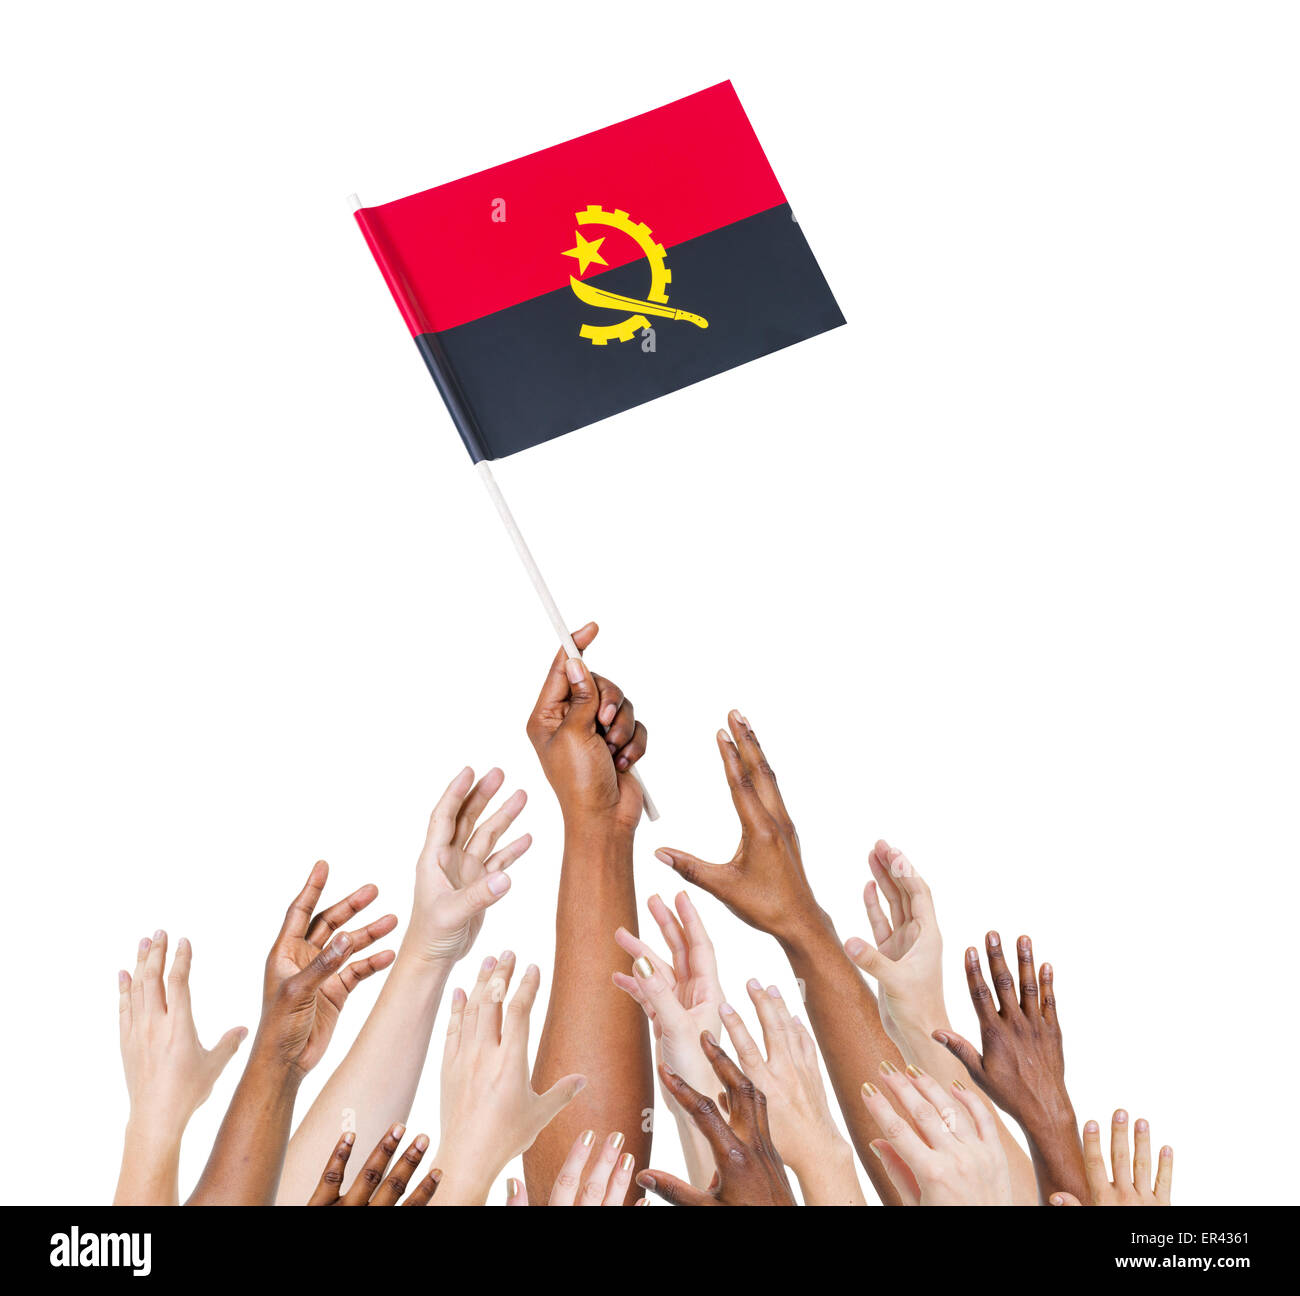 Group of people reaching for and holding the Angolan flag. Stock Photo